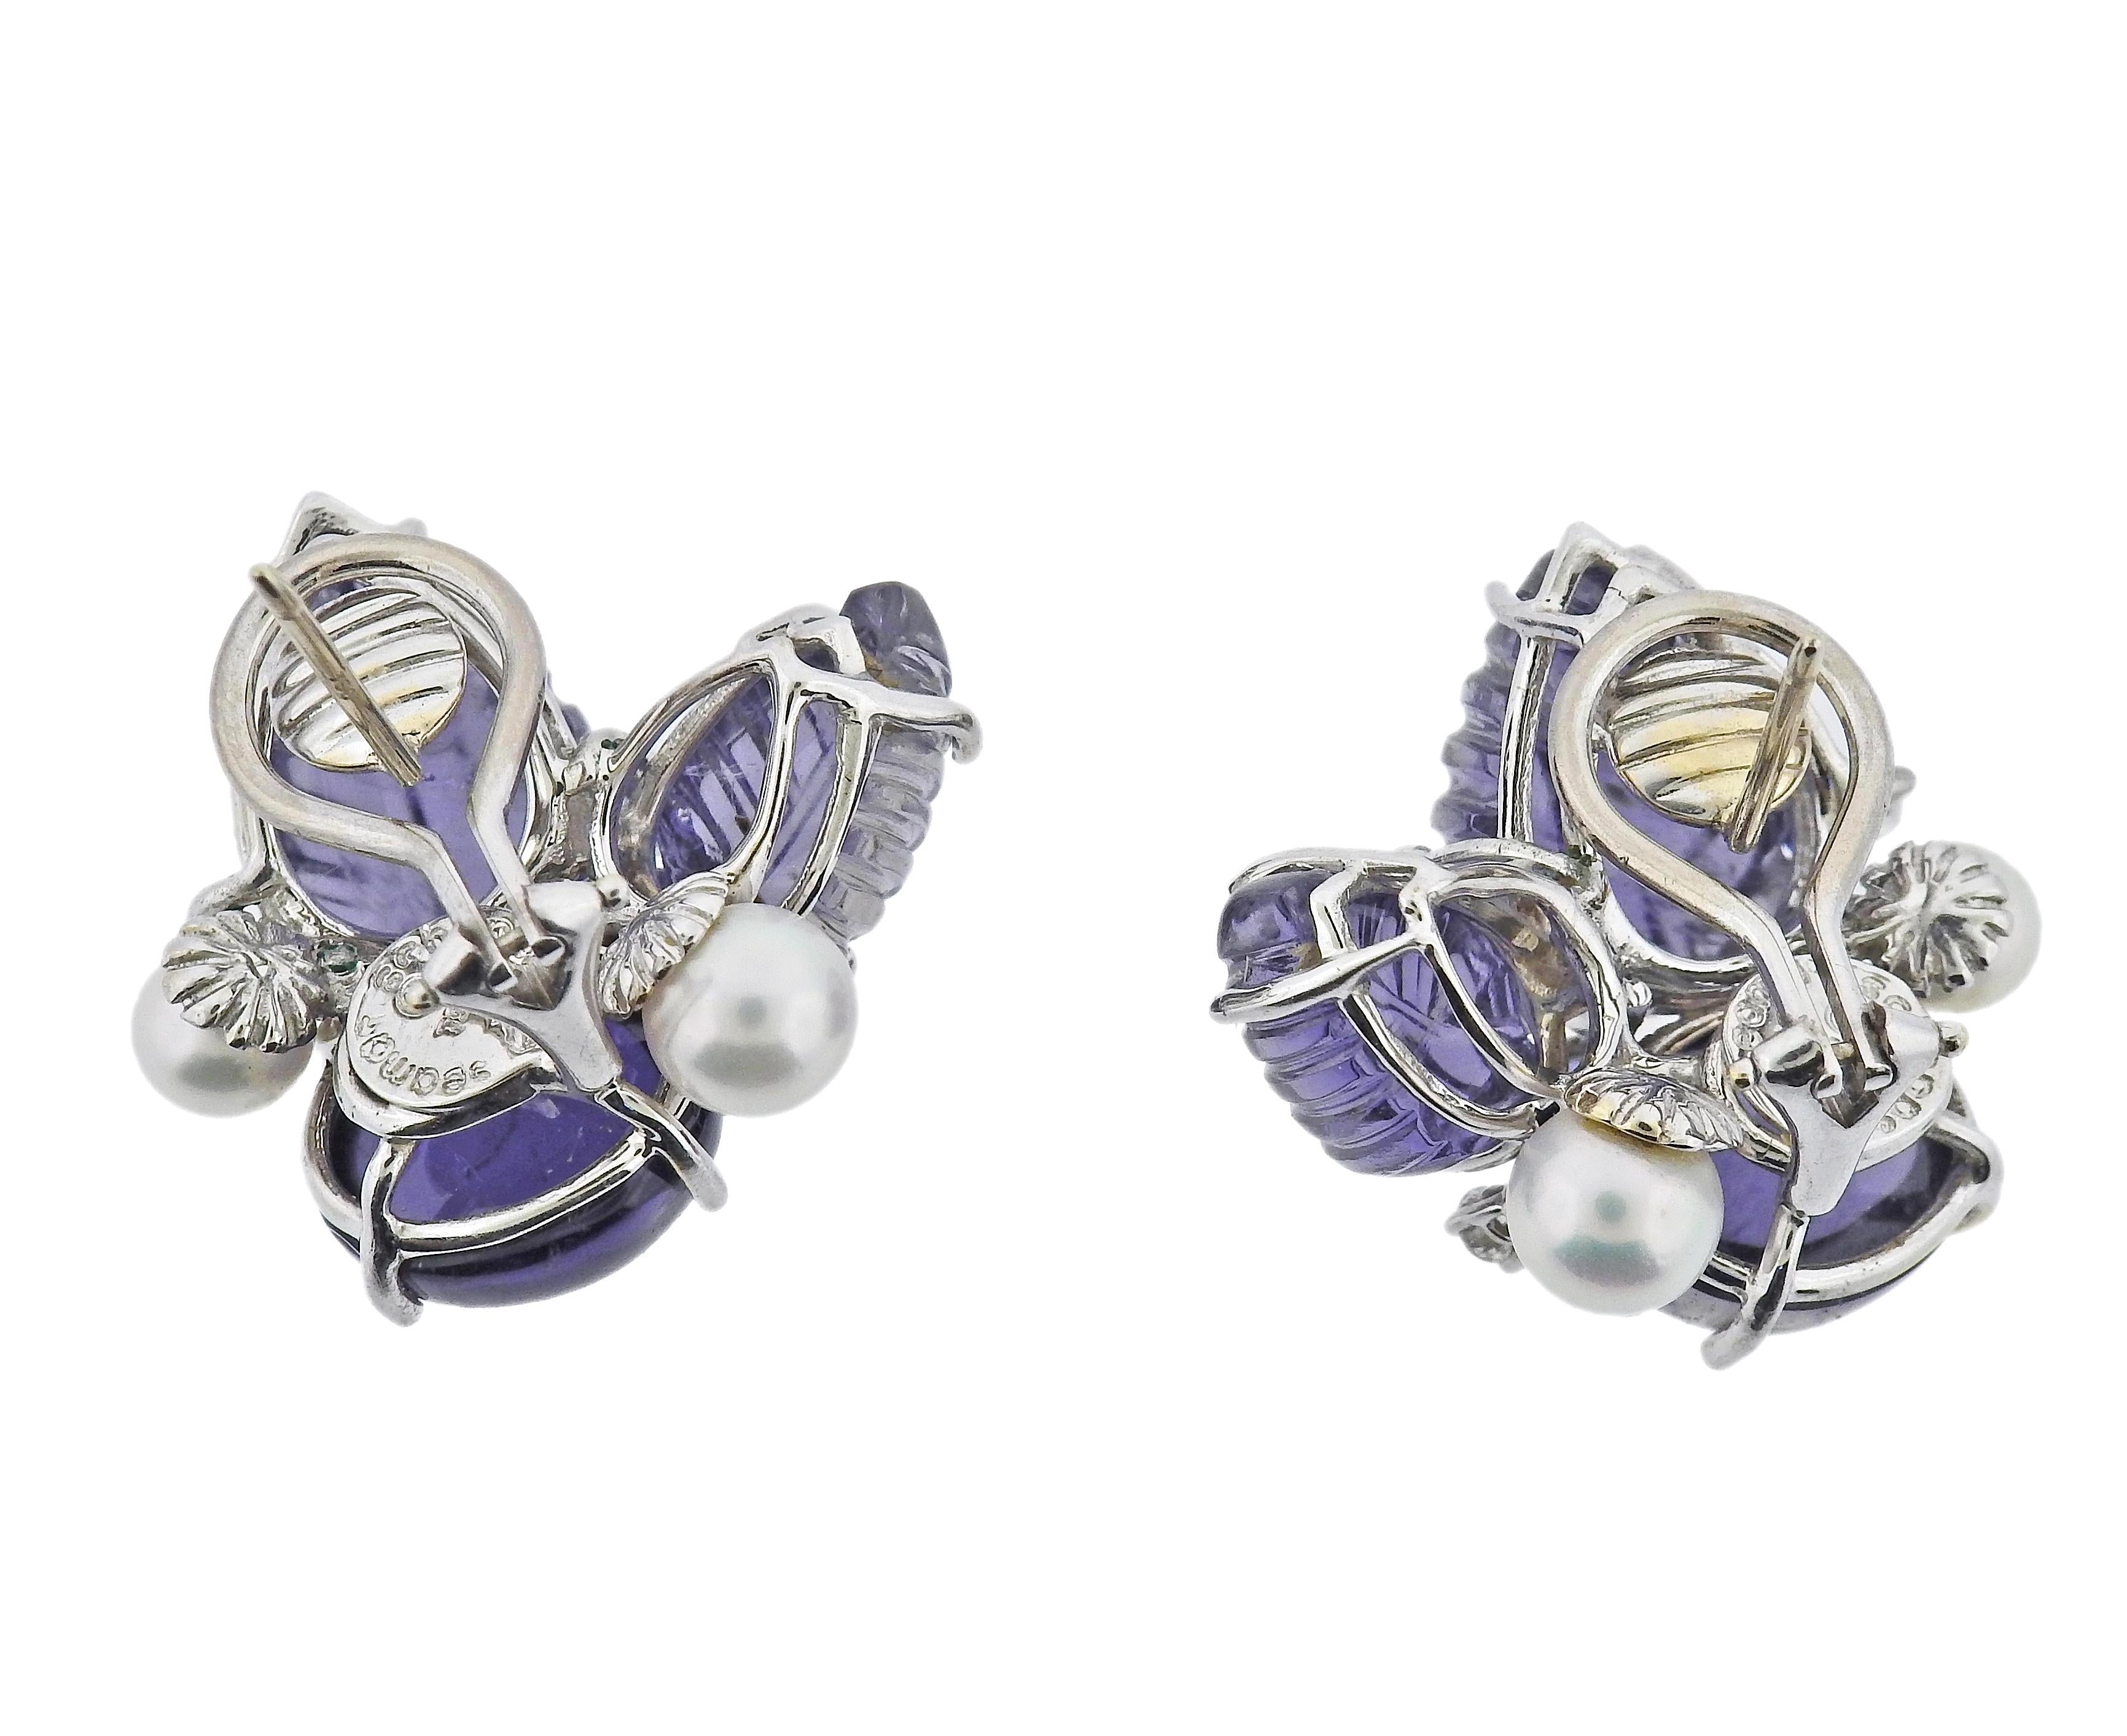 Pair of 18k gold earrings by Seaman Schepps, with iolite, sapphires, pearls and approx. 0.22ctw G/VS diamonds.  Earrings are 25mm x 27mm. Weight - 19.8 grams. Marked: Shell hallmark, Seaman Schepps, L297, 750. 